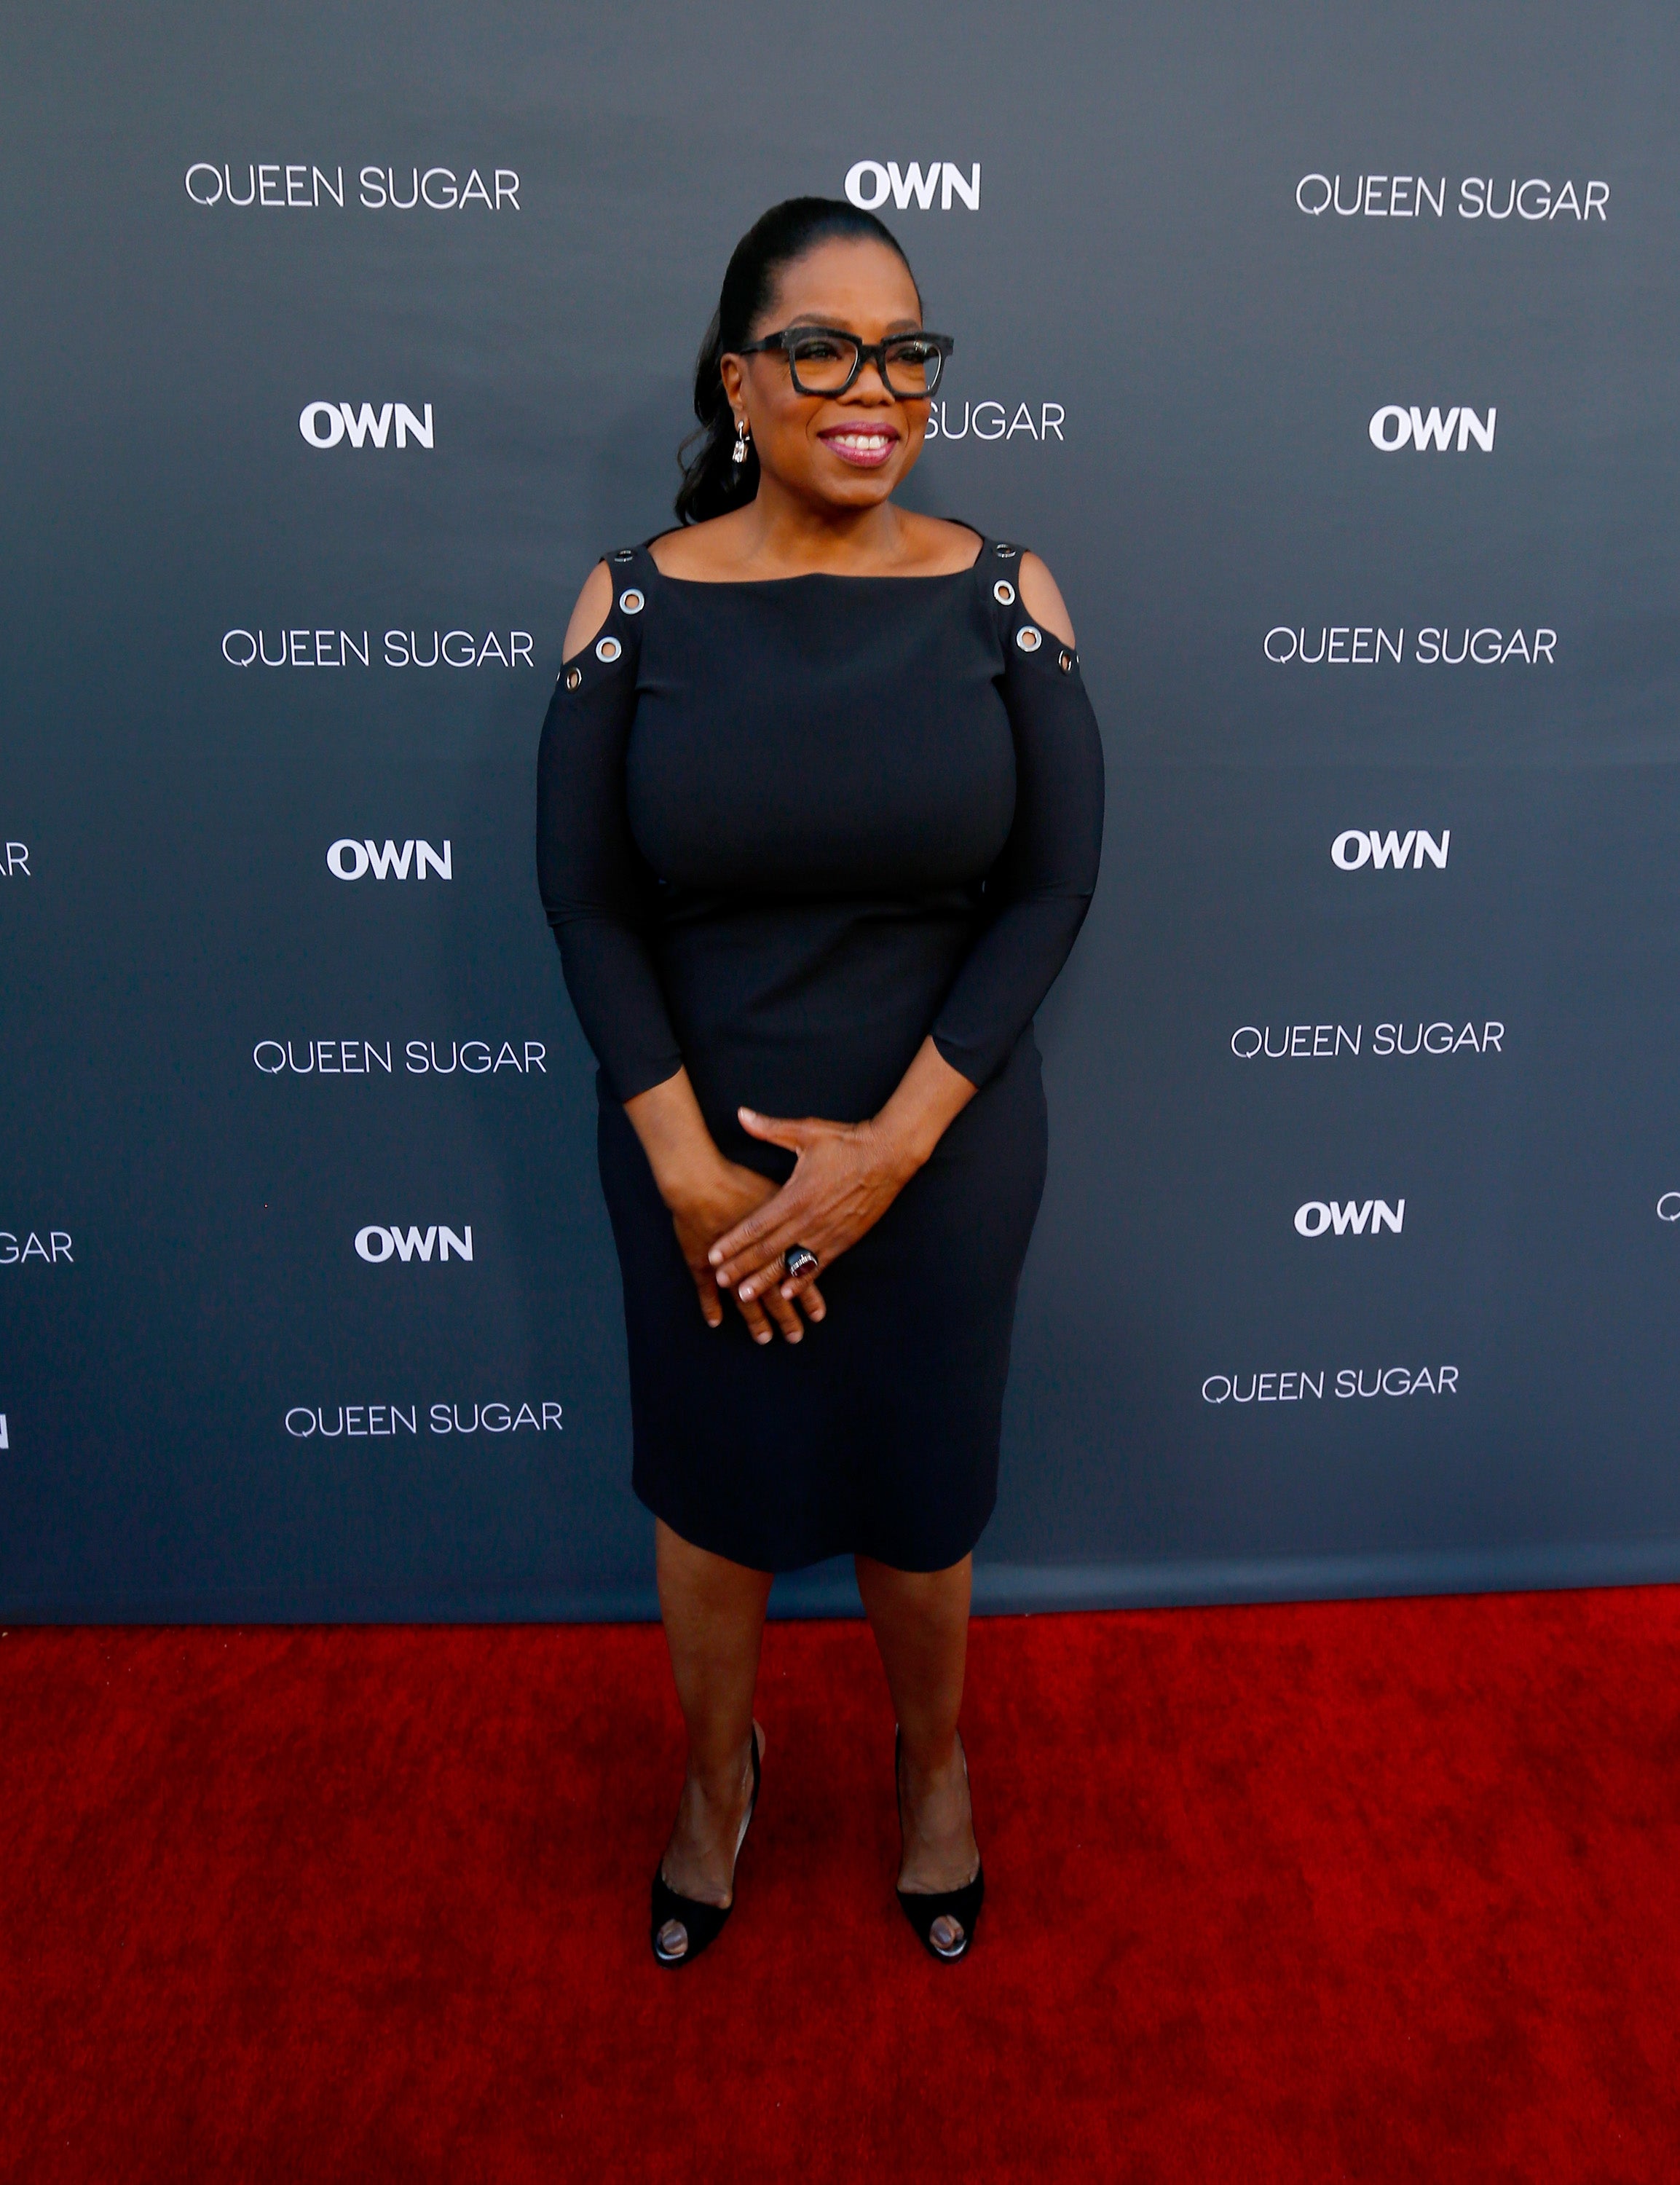 Oprah Winfrey and Ava DuVernay Shine at  OWN's “Queen Sugar” Premiere
